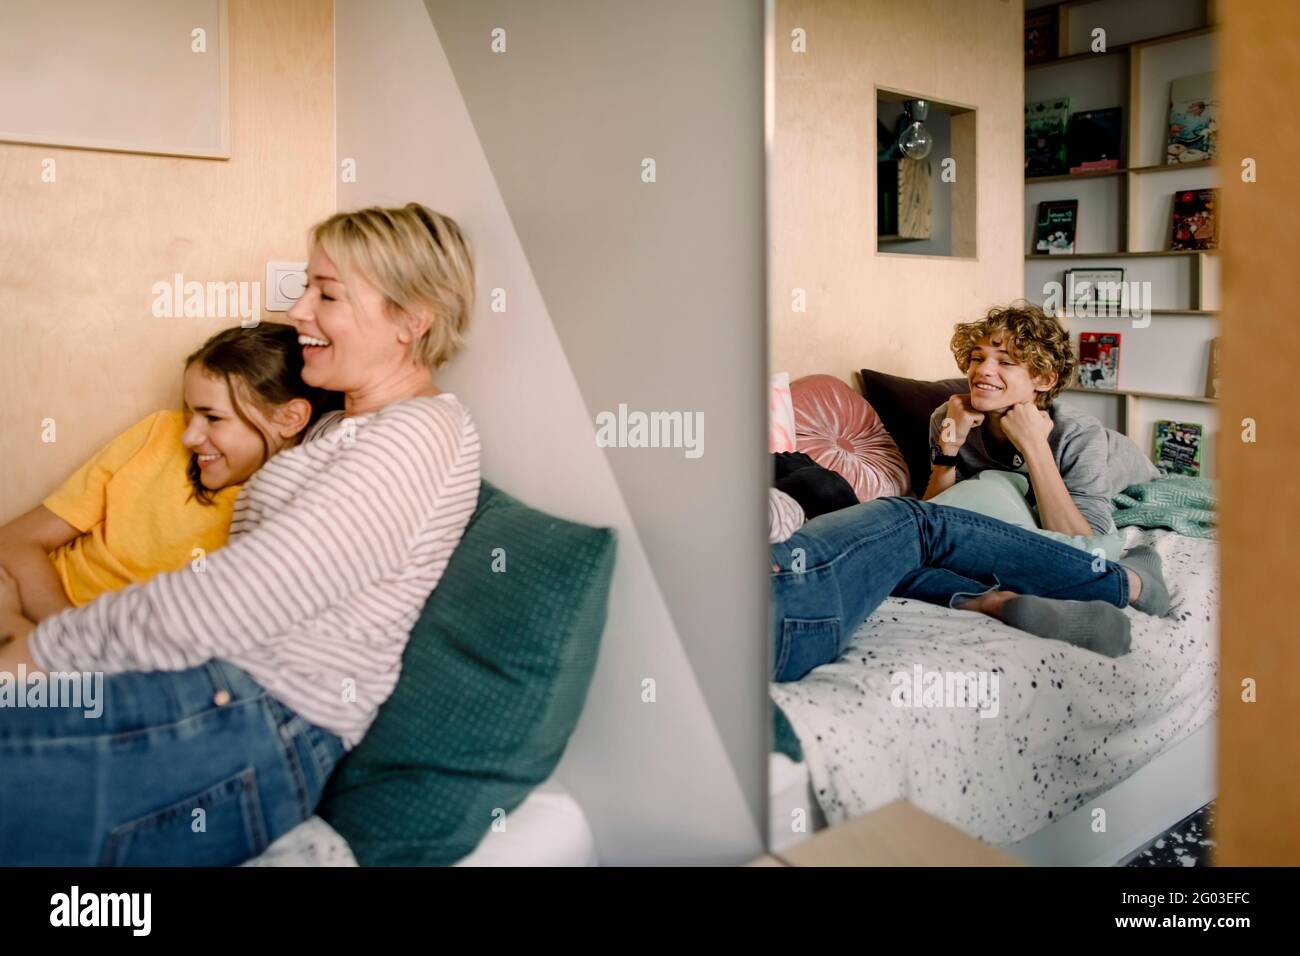 Smiling boy lying on bed while looking at mother and sister seen through mirror Stock Photo